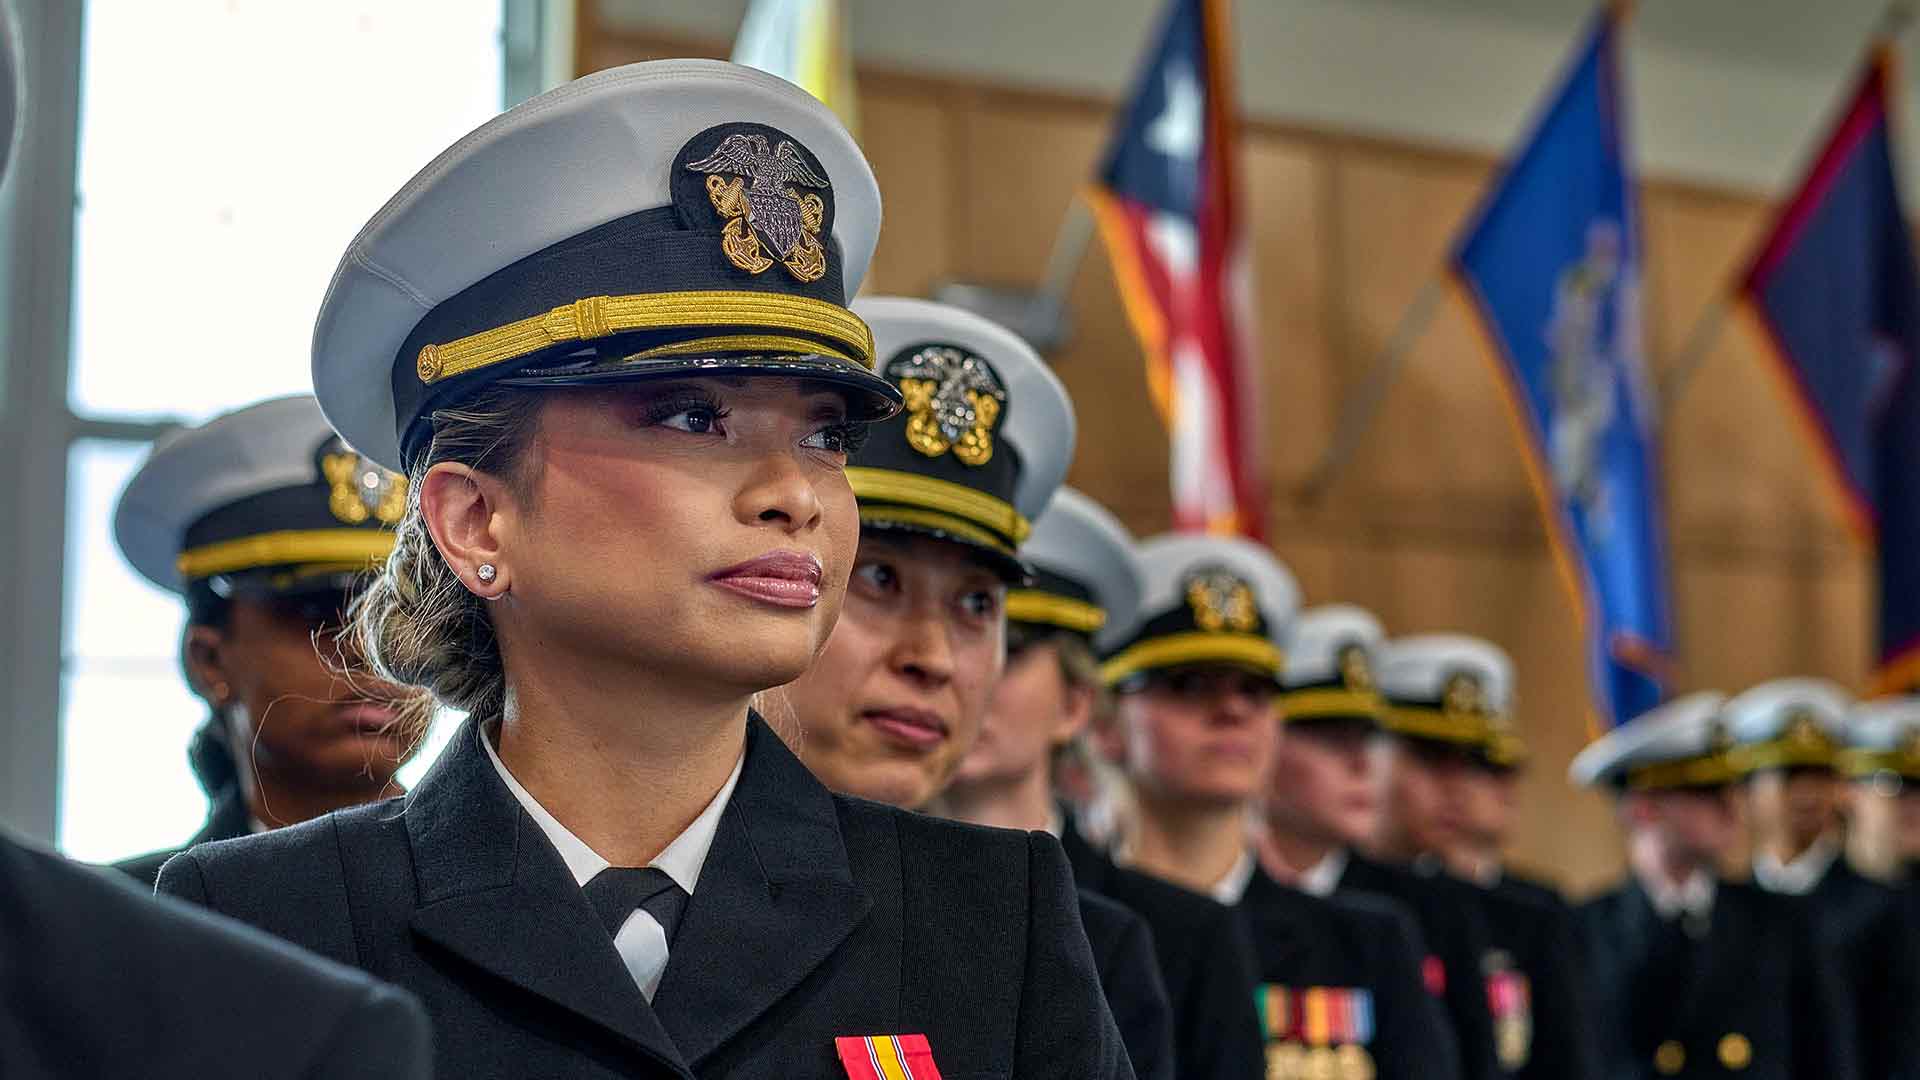 Ensign Liberty Zabala Stands Proud At Her Graduation From Officer Development School As New Sailor In The Navy Reserve